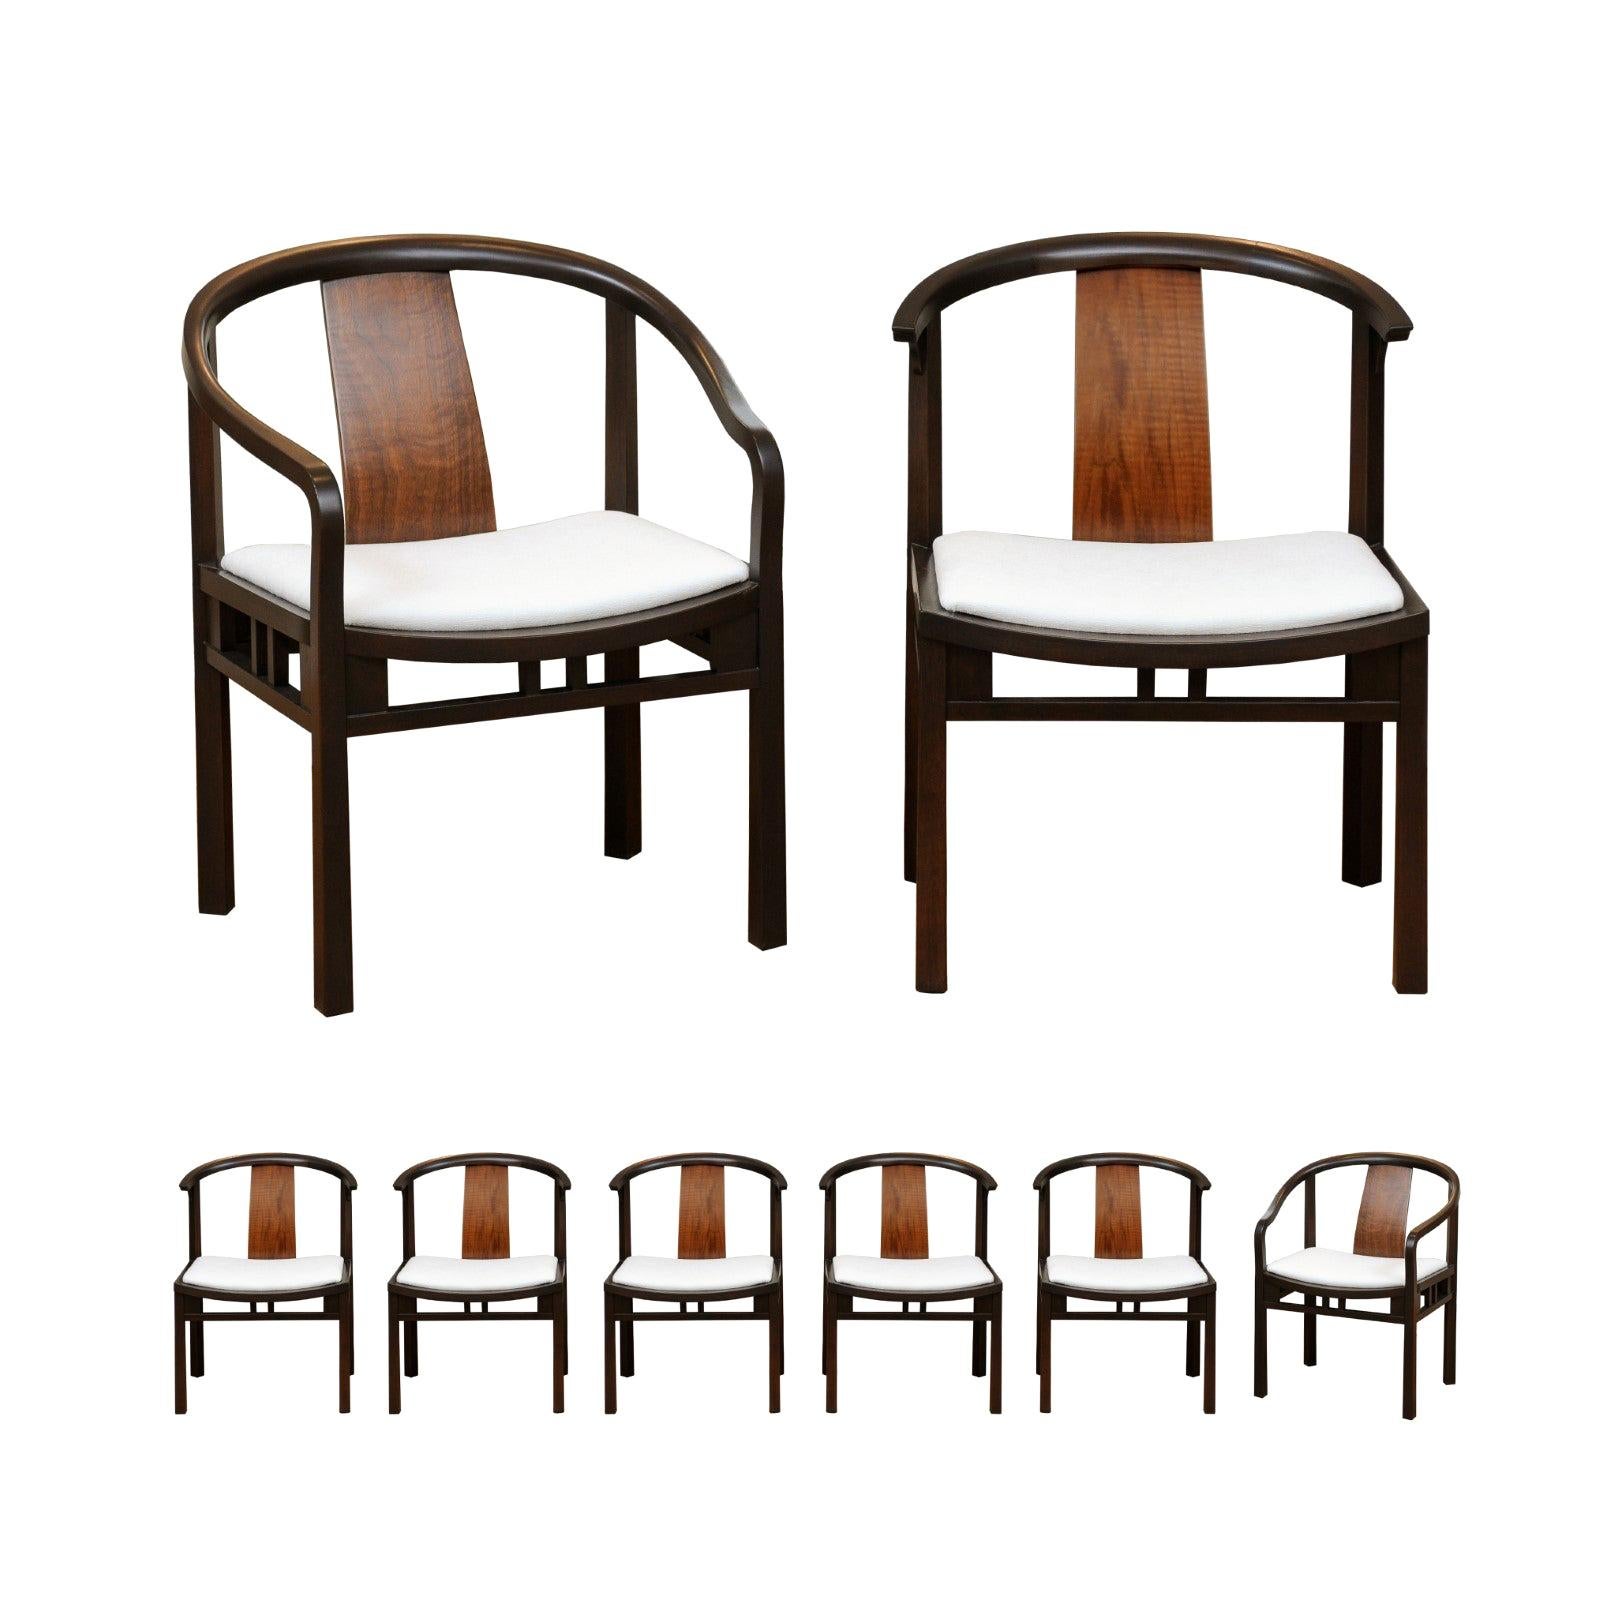 Circa 1955, Stellar Set of 8 Walnut Dining Chairs by Michael Taylor for Baker